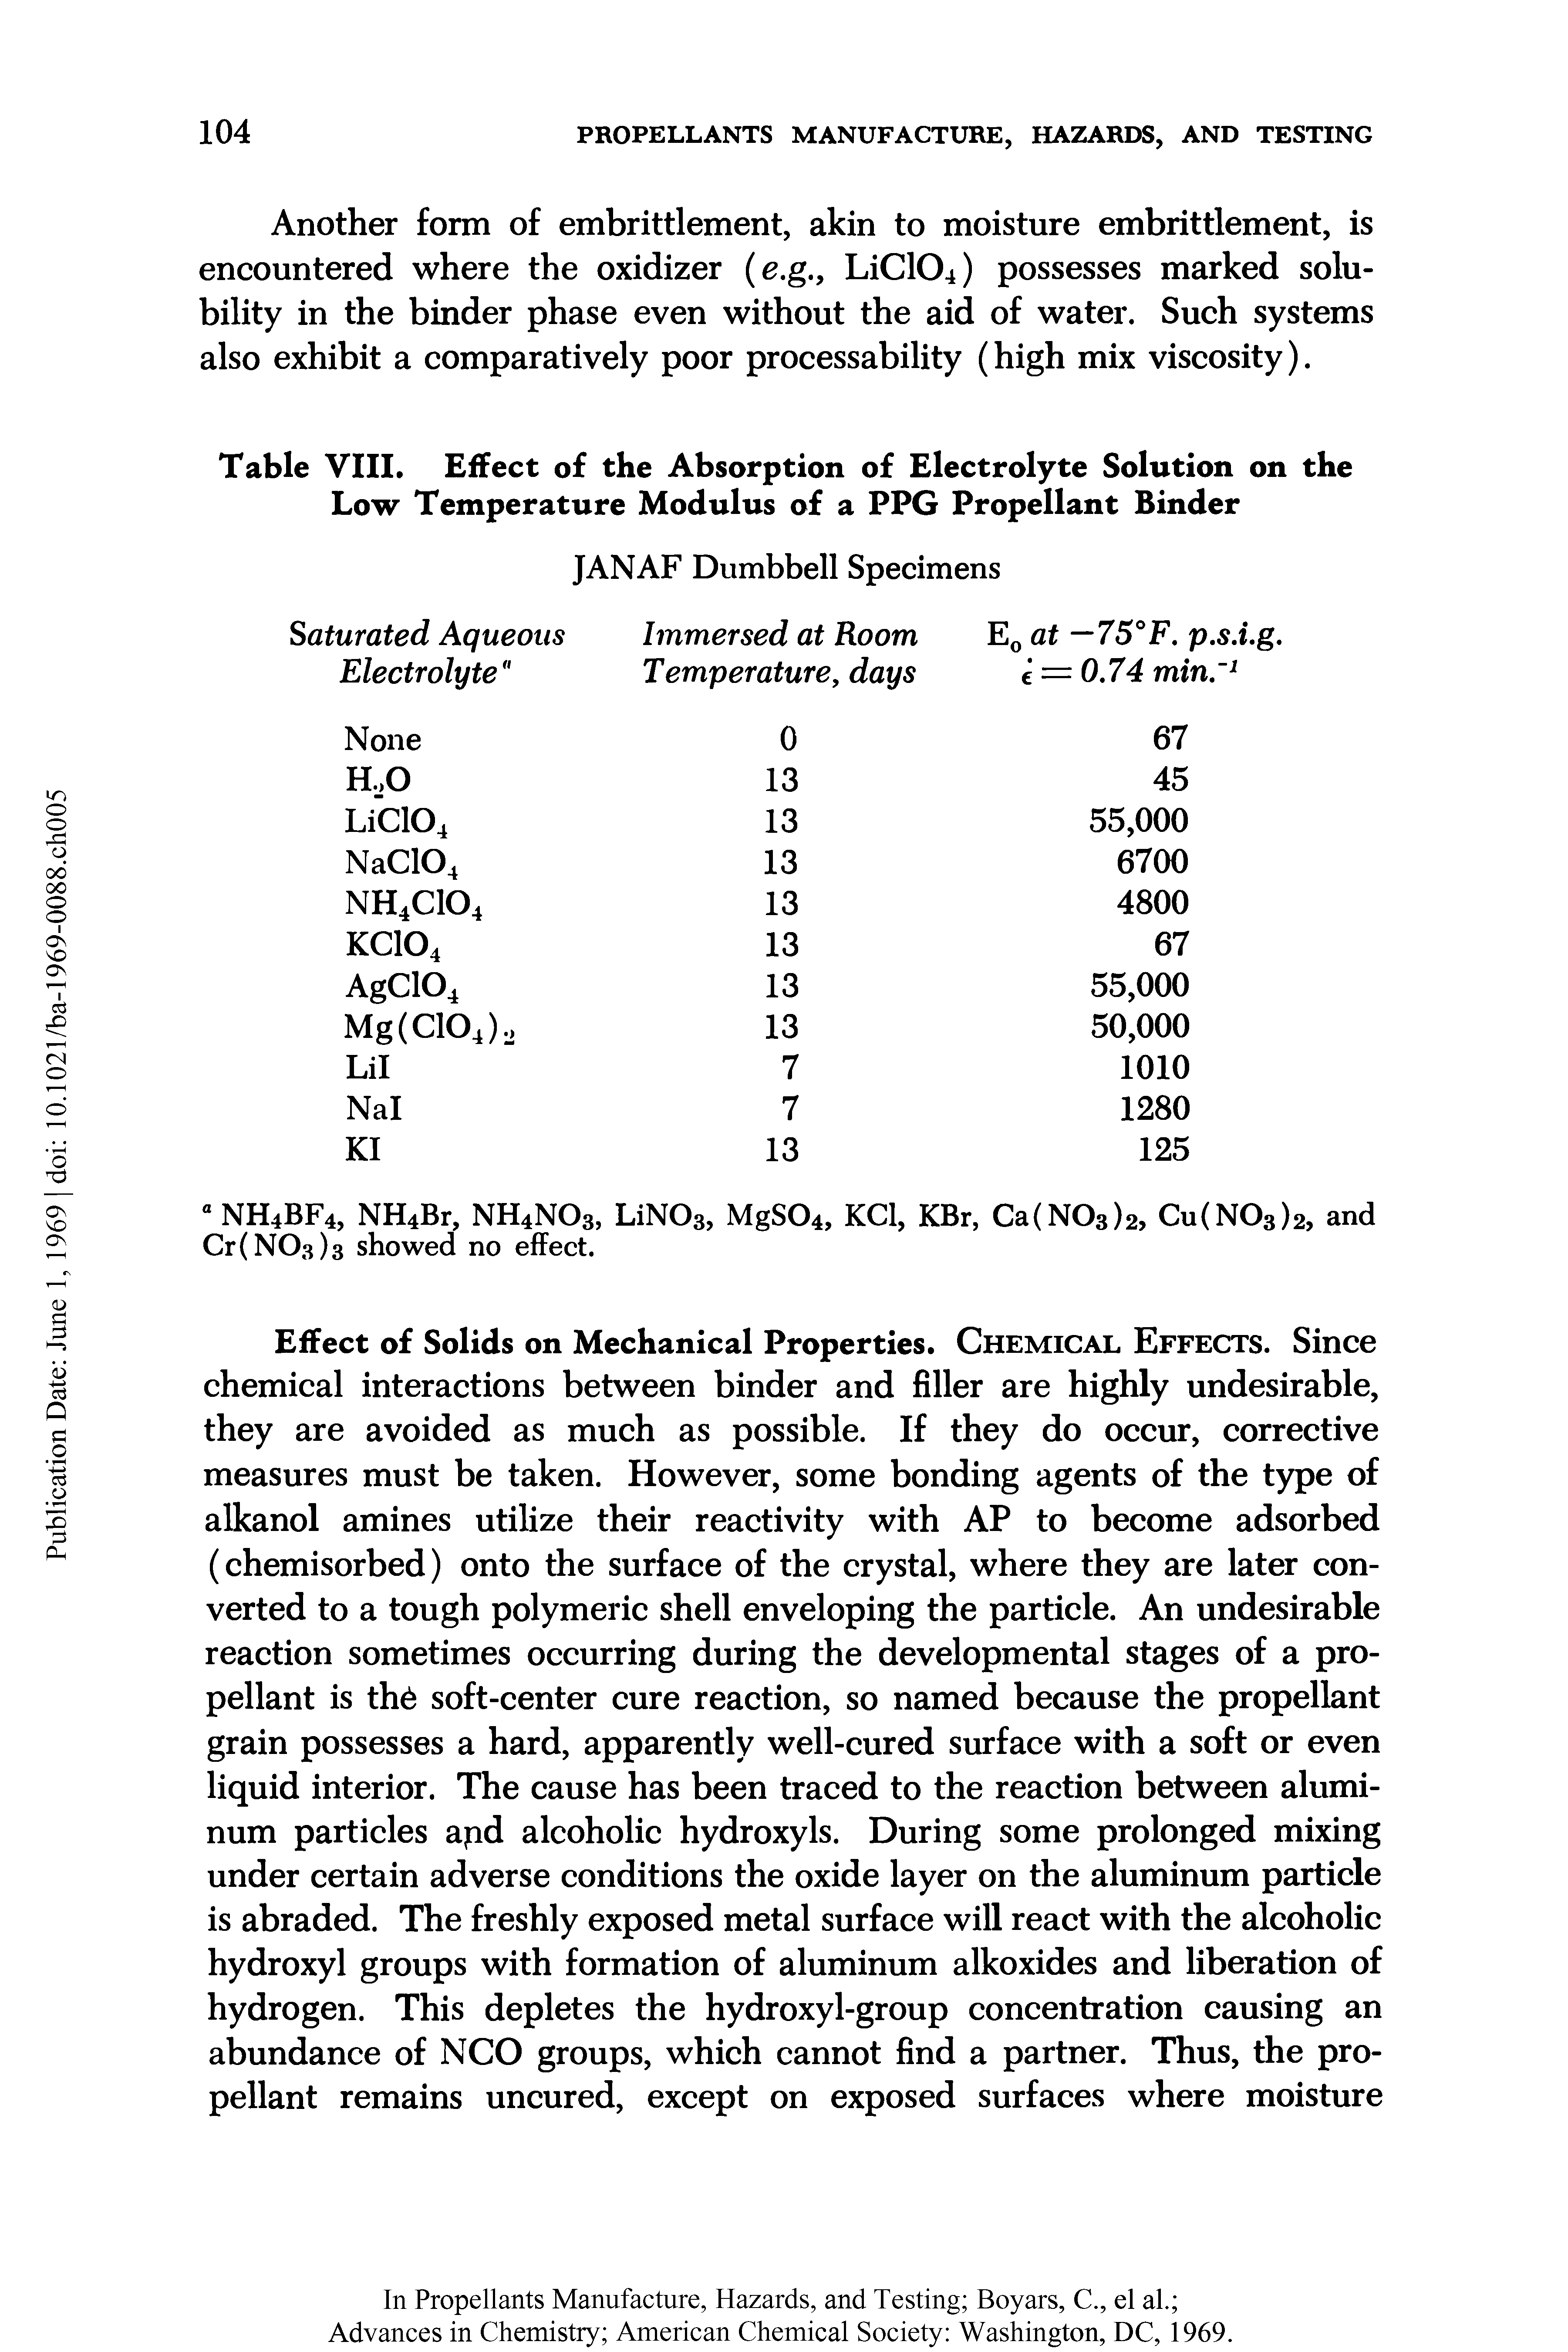 Table VIII. Effect of the Absorption of Electrolyte Solution on the Low Temperature Modulus of a PPG Propellant Binder...